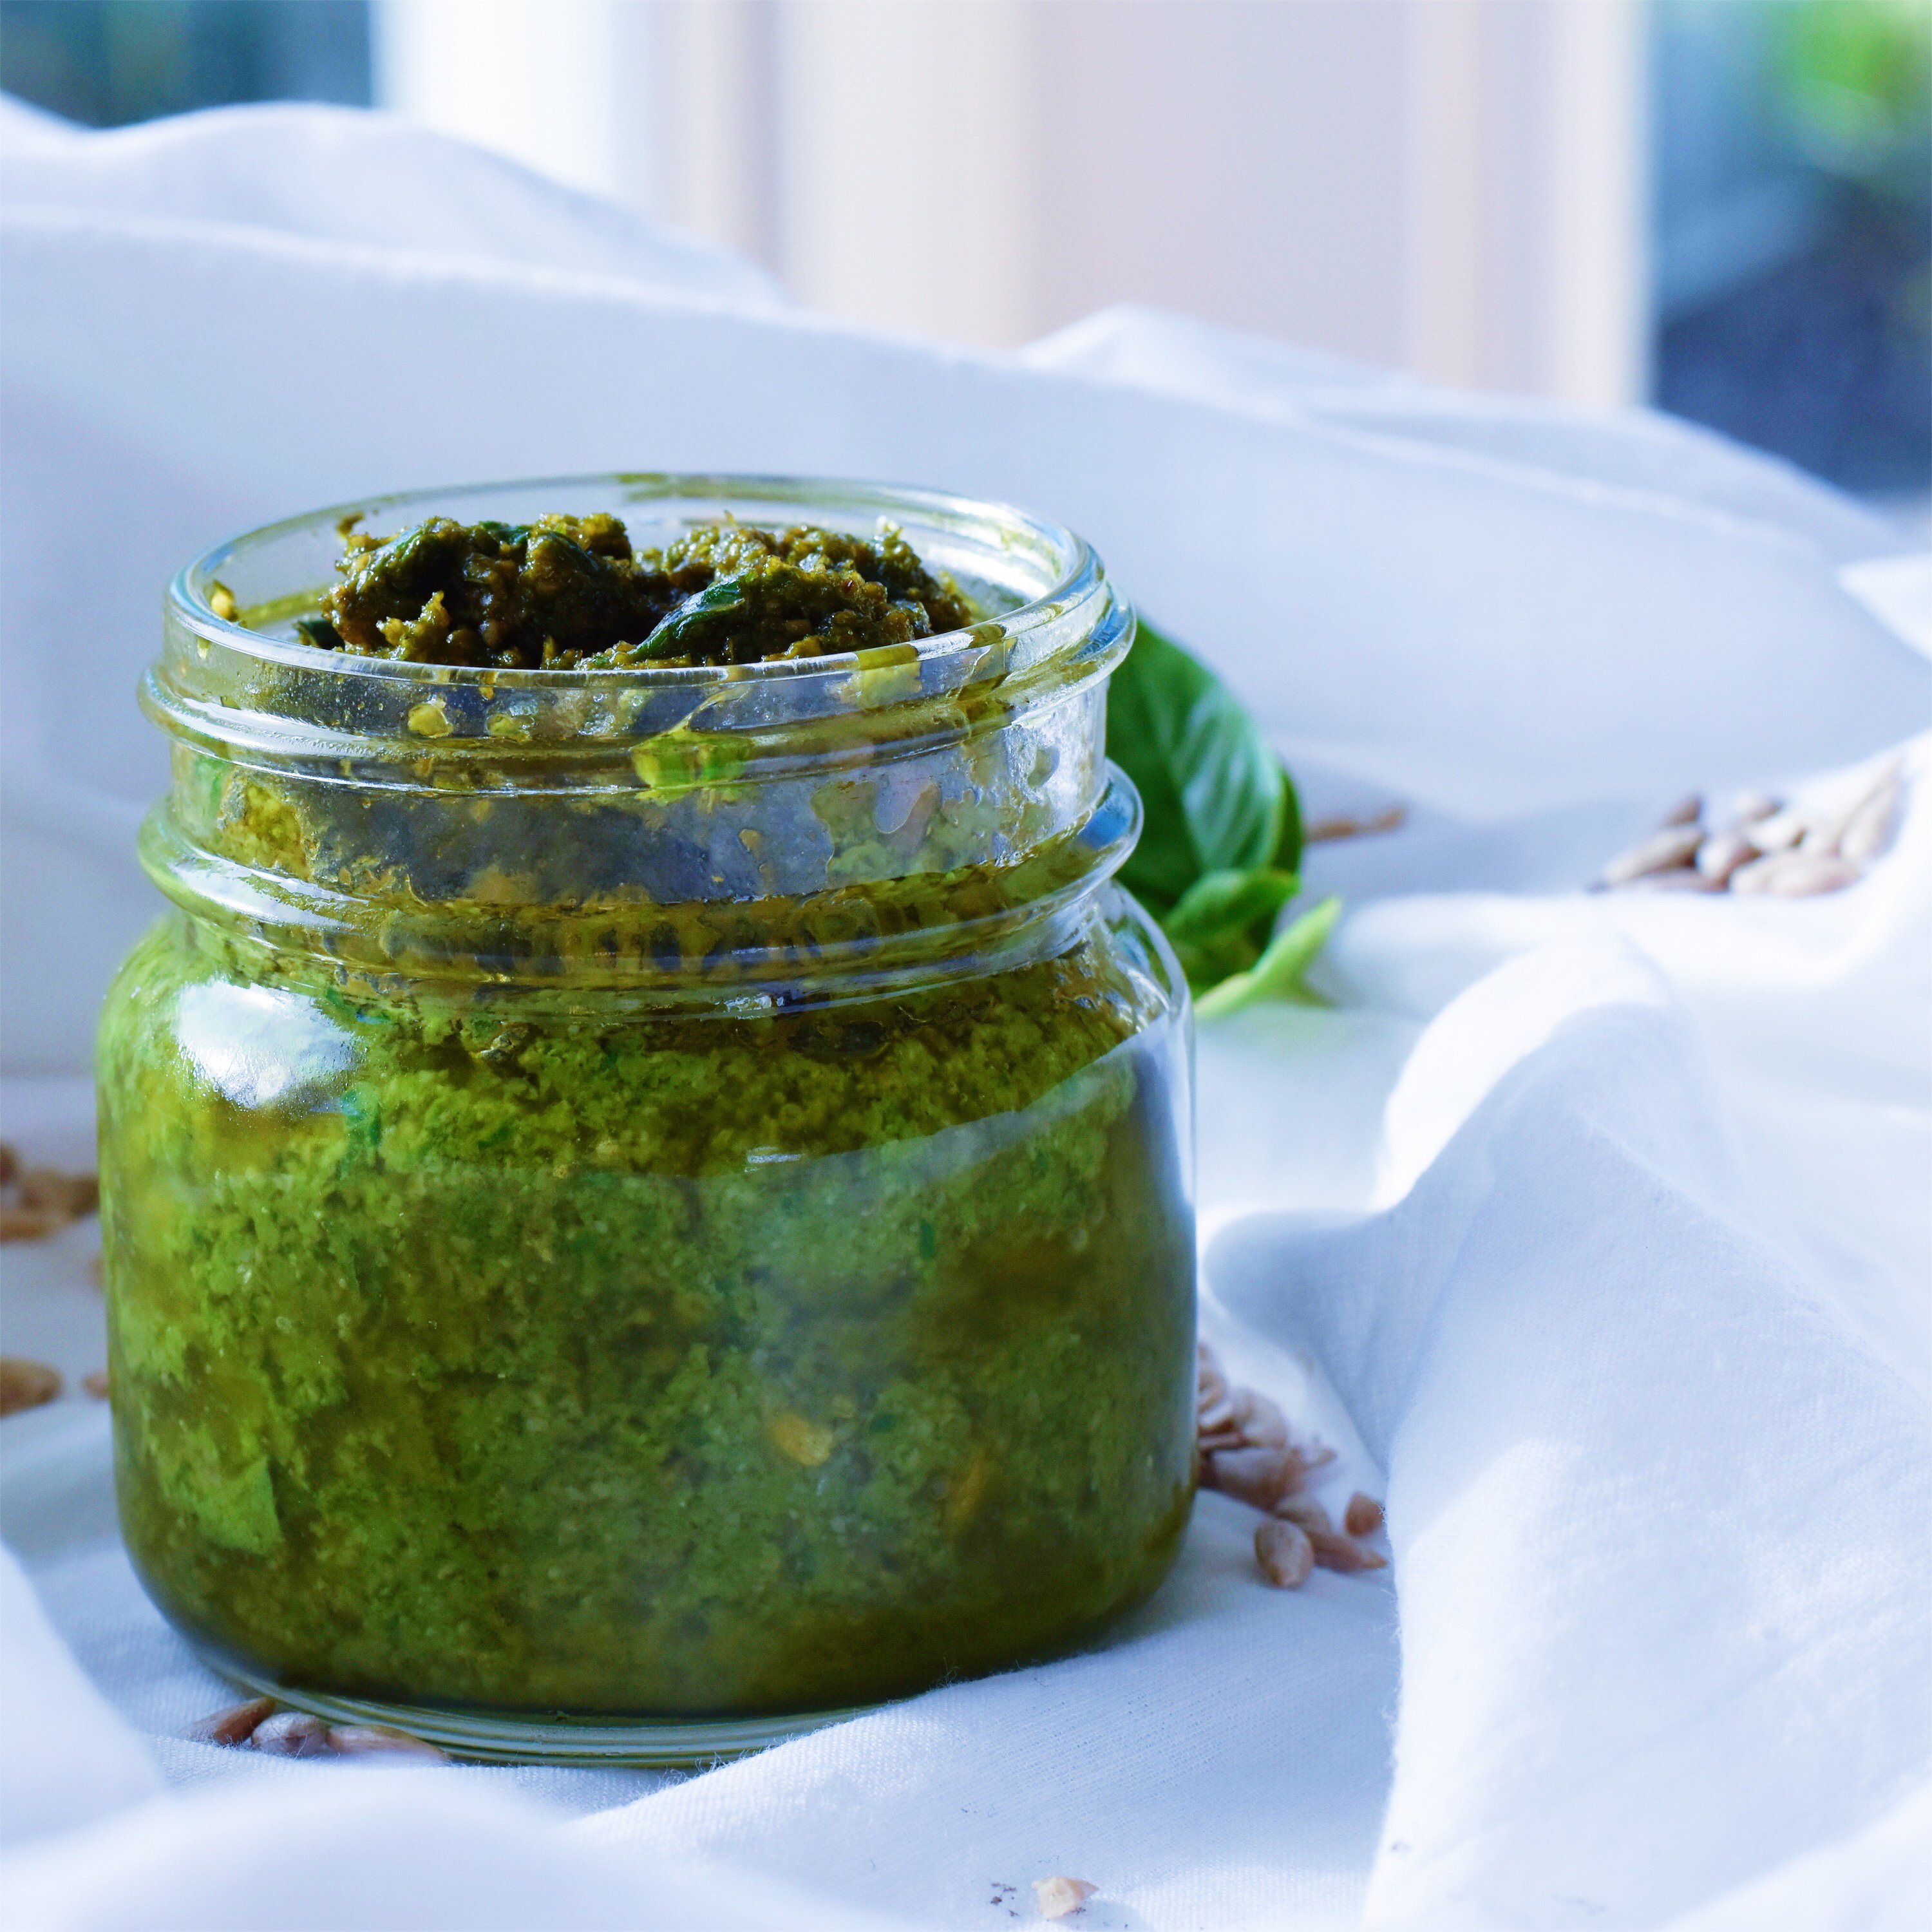 Featured image for “Basil and Sunflower Seed Pesto”